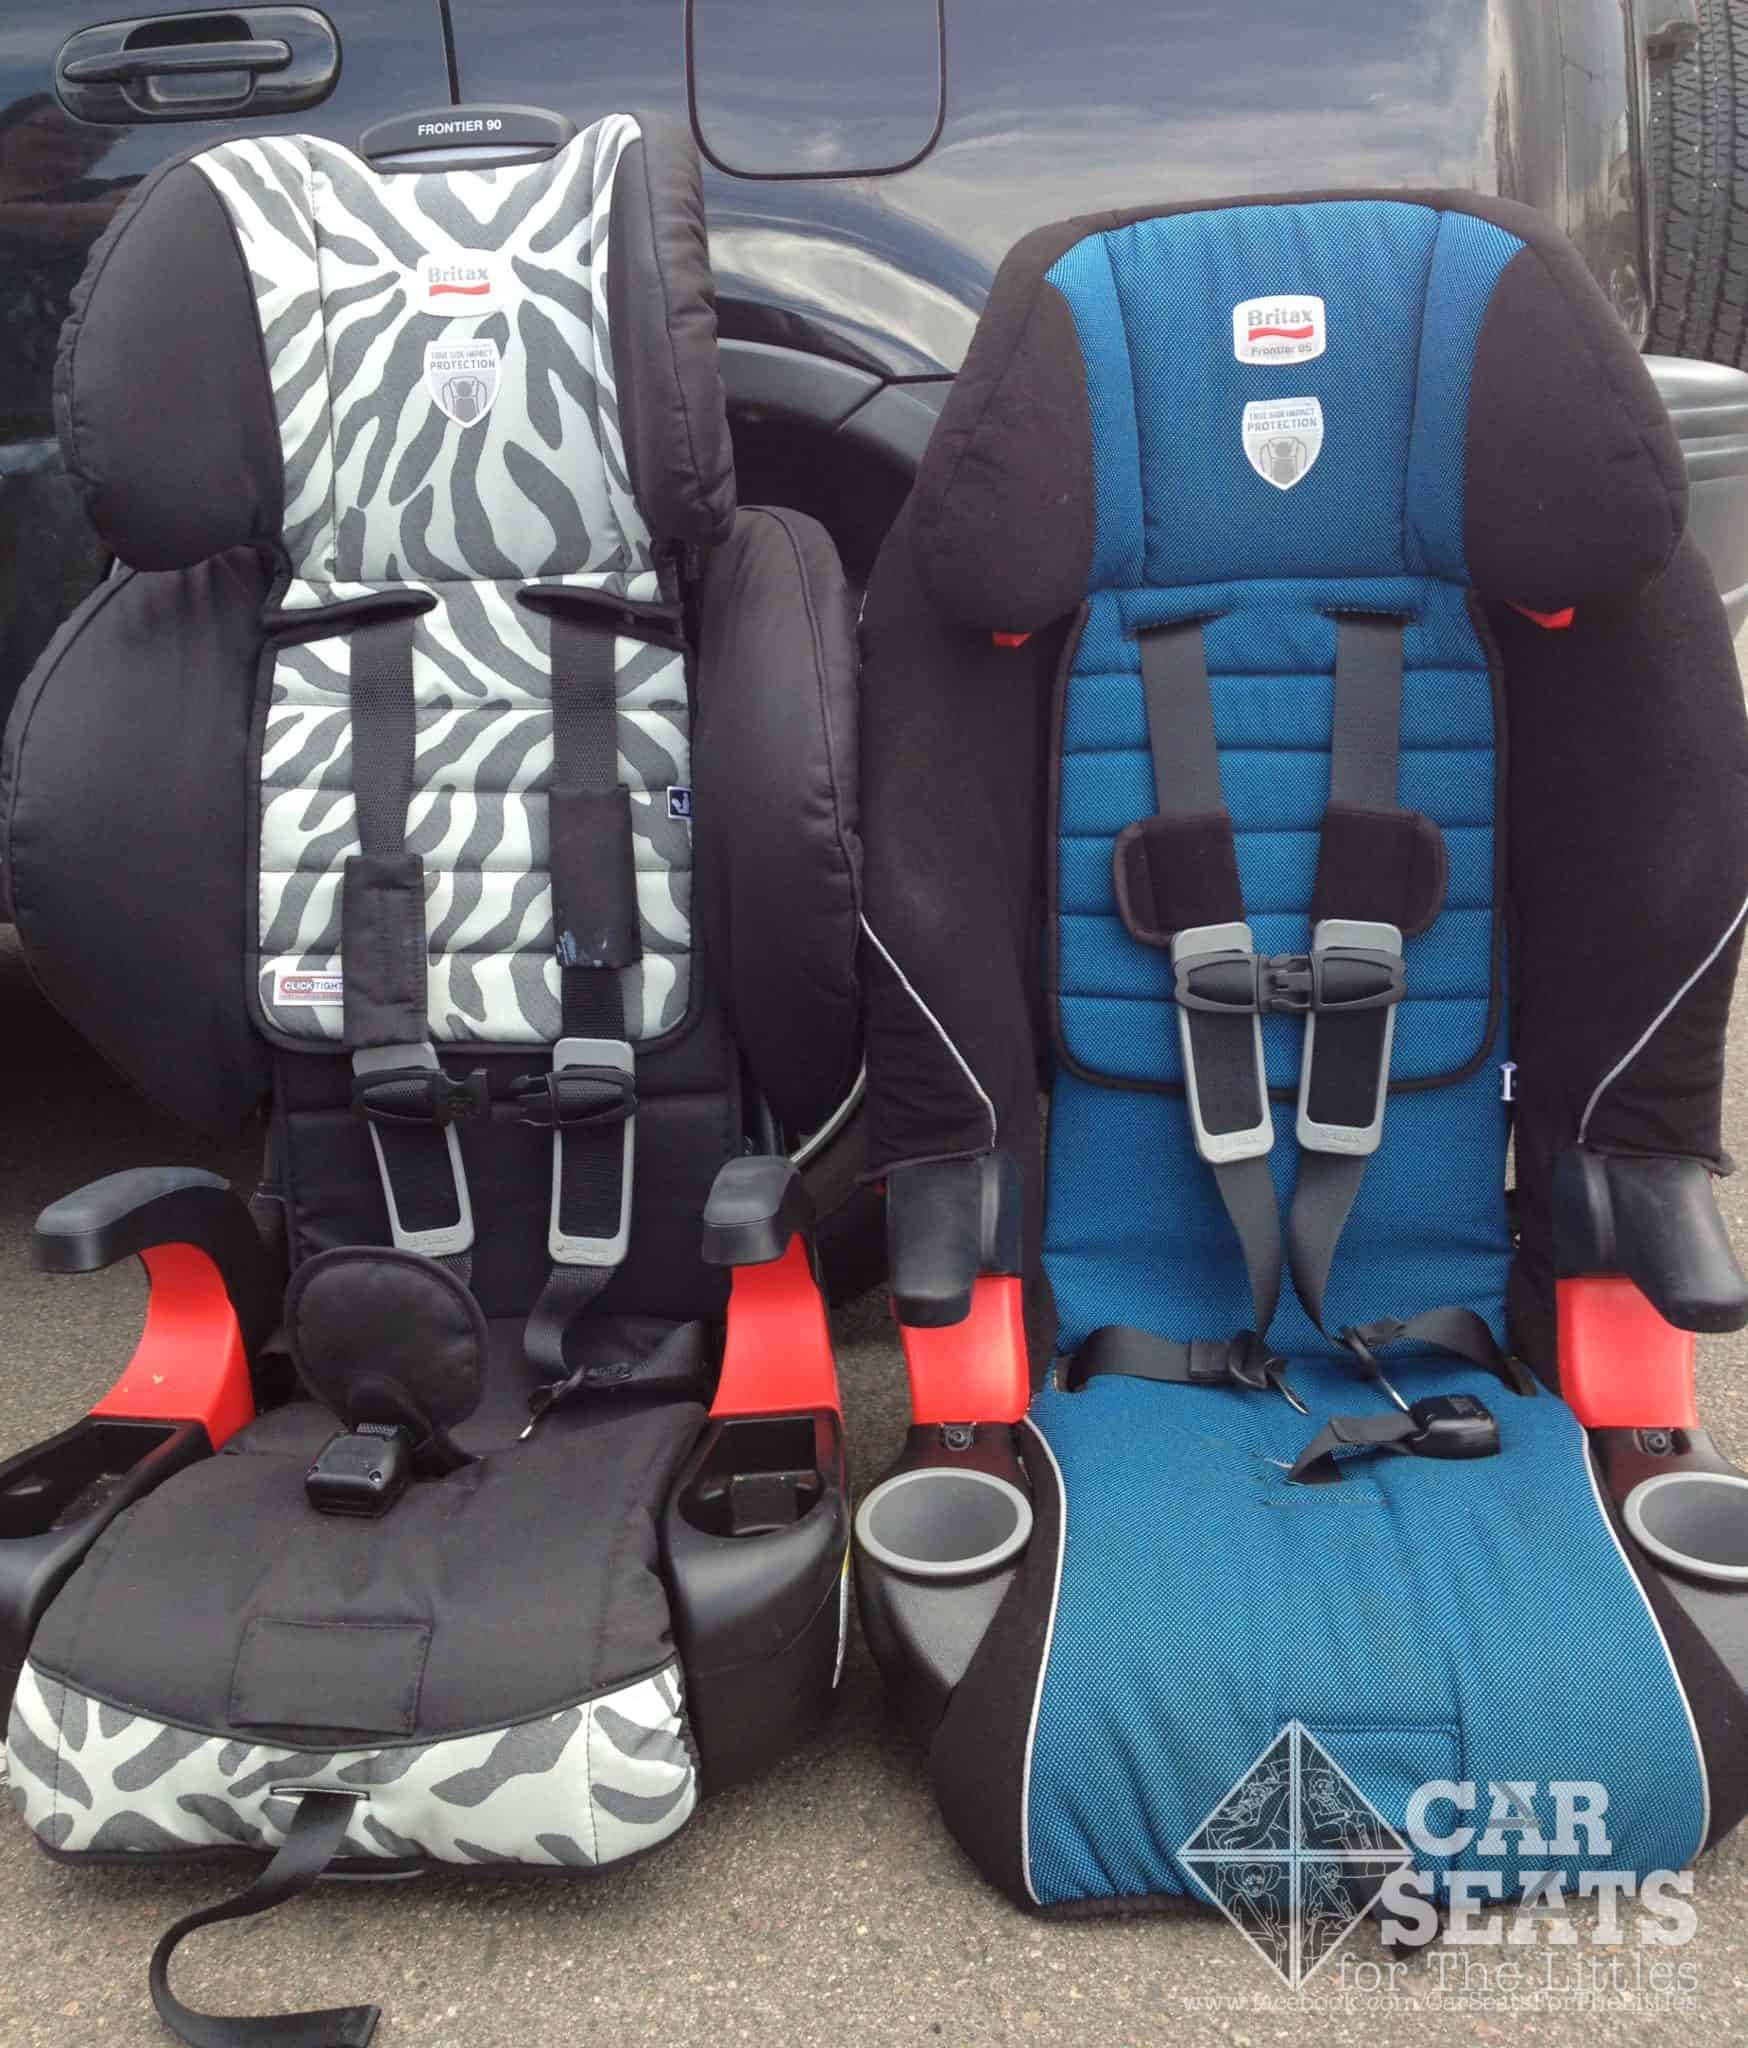 Britax Frontier 90 The Quickest Unofficial Review Of Seat You Ve Ever Installed Car Seats For Littles - How To Put Britax Frontier Car Seat Cover Back On